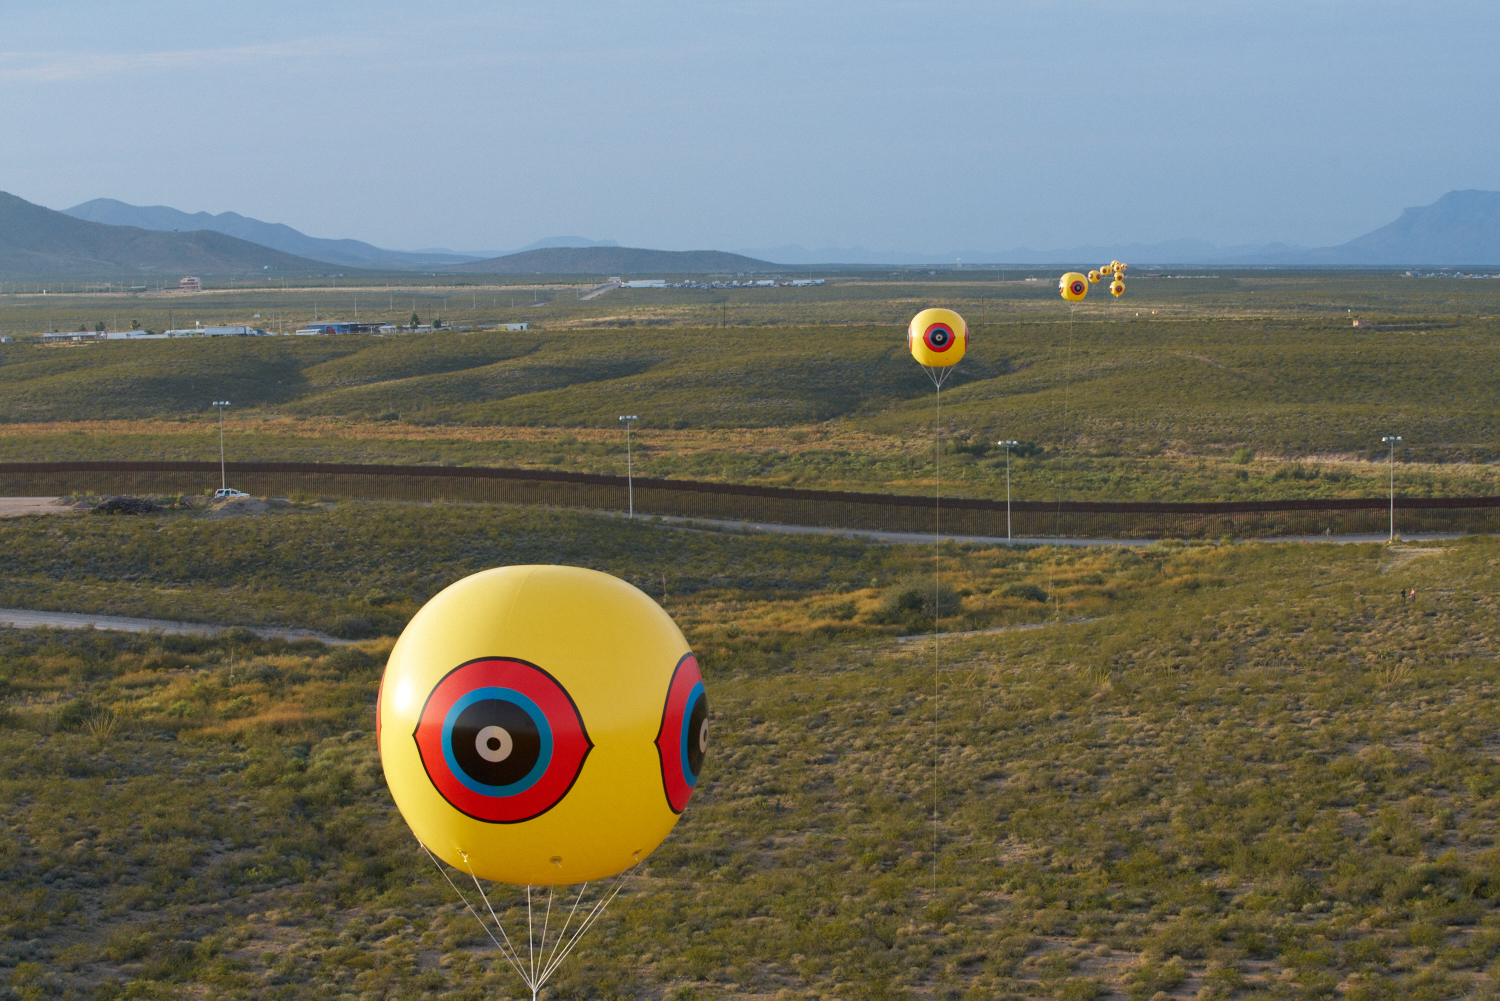 Installation detail, seen from Mexico, showing one of the balloons that comprise the Repellent Fence / Valla Repelente in relationship to the US border fence. In this image the US Border Fence reflects the sunlight at dusk. Photo by Michael Lundgren. Courtesy of Postcommodity.